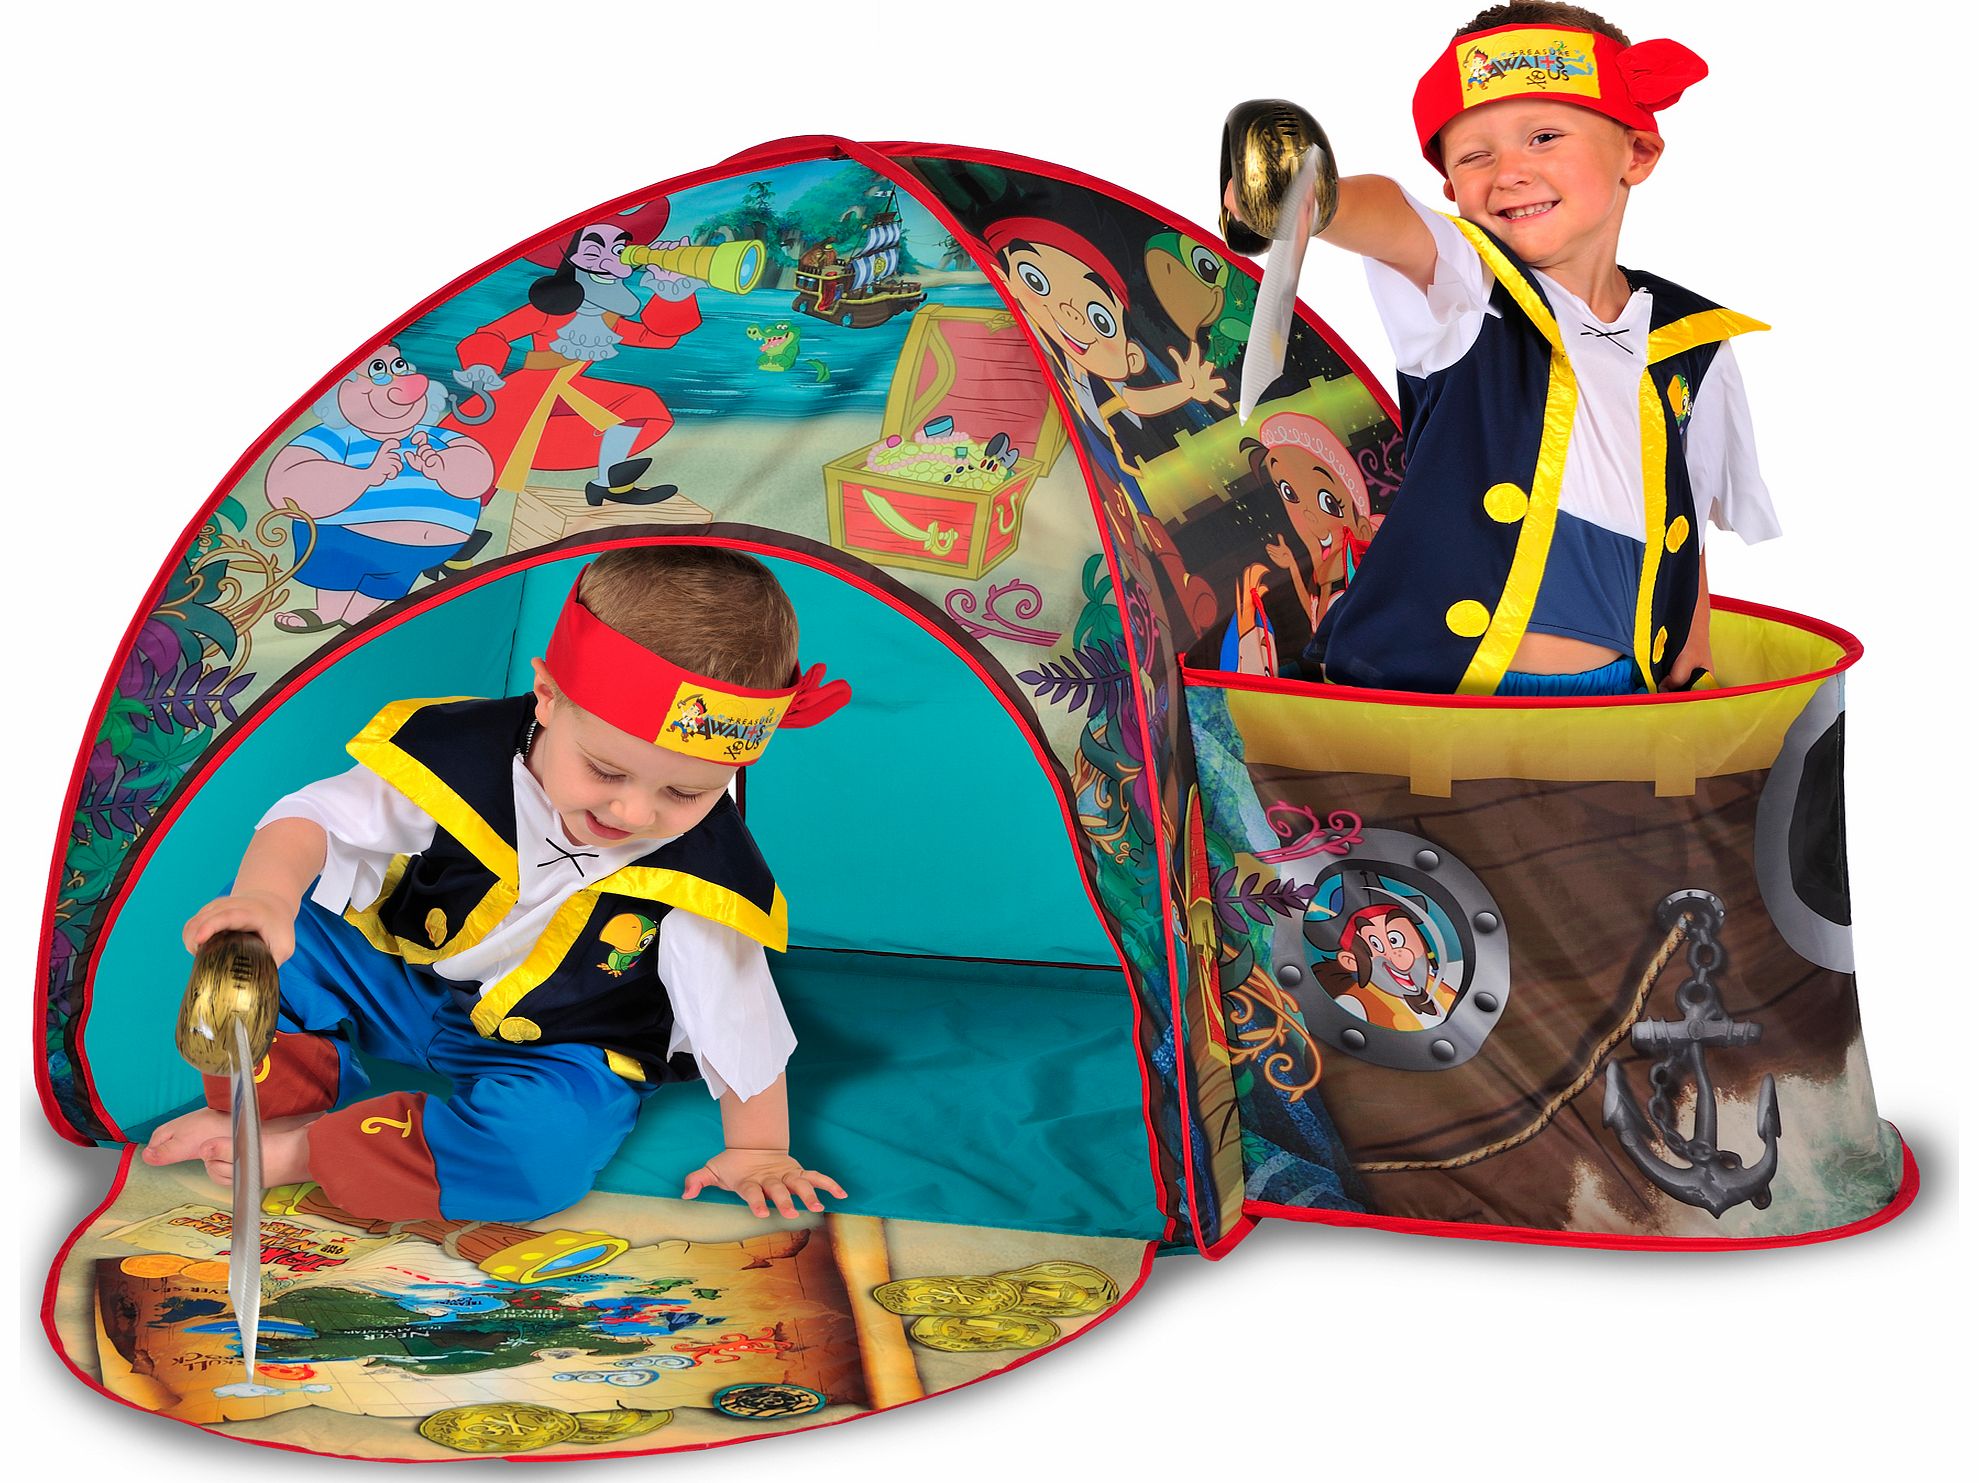 Disney Jake and the Neverland Pirates Character Tent